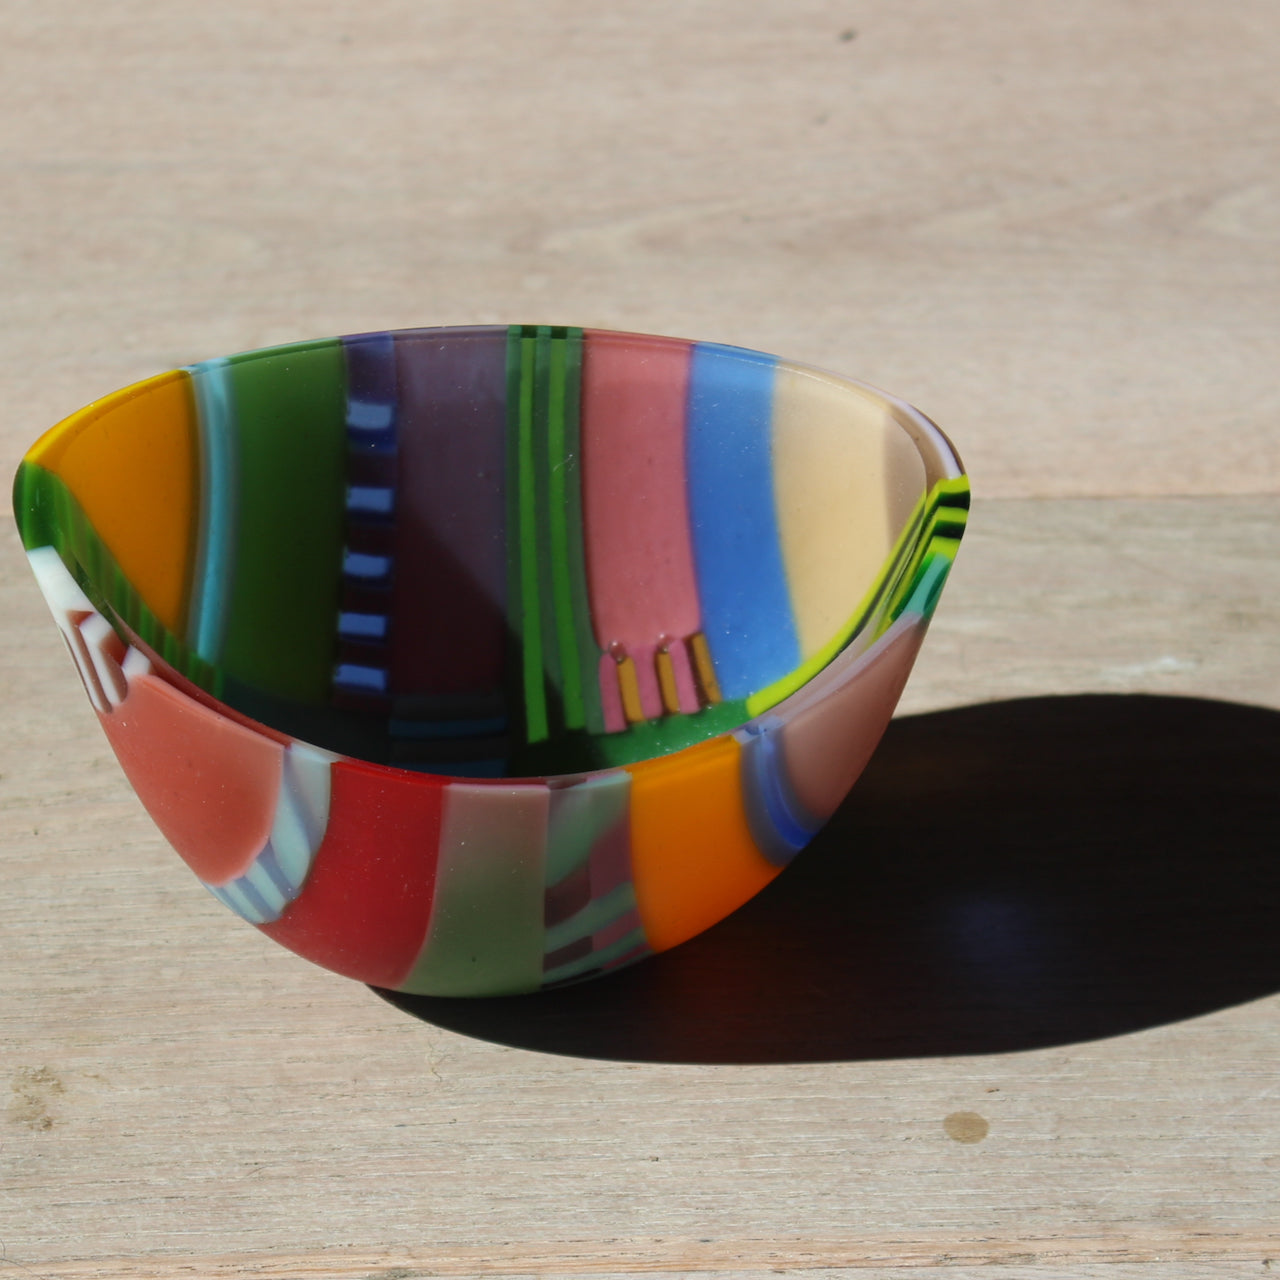 Beautiful vibrant glass bowl by artist Ruth Shelley in tones of pink, green, yellow, blue, red